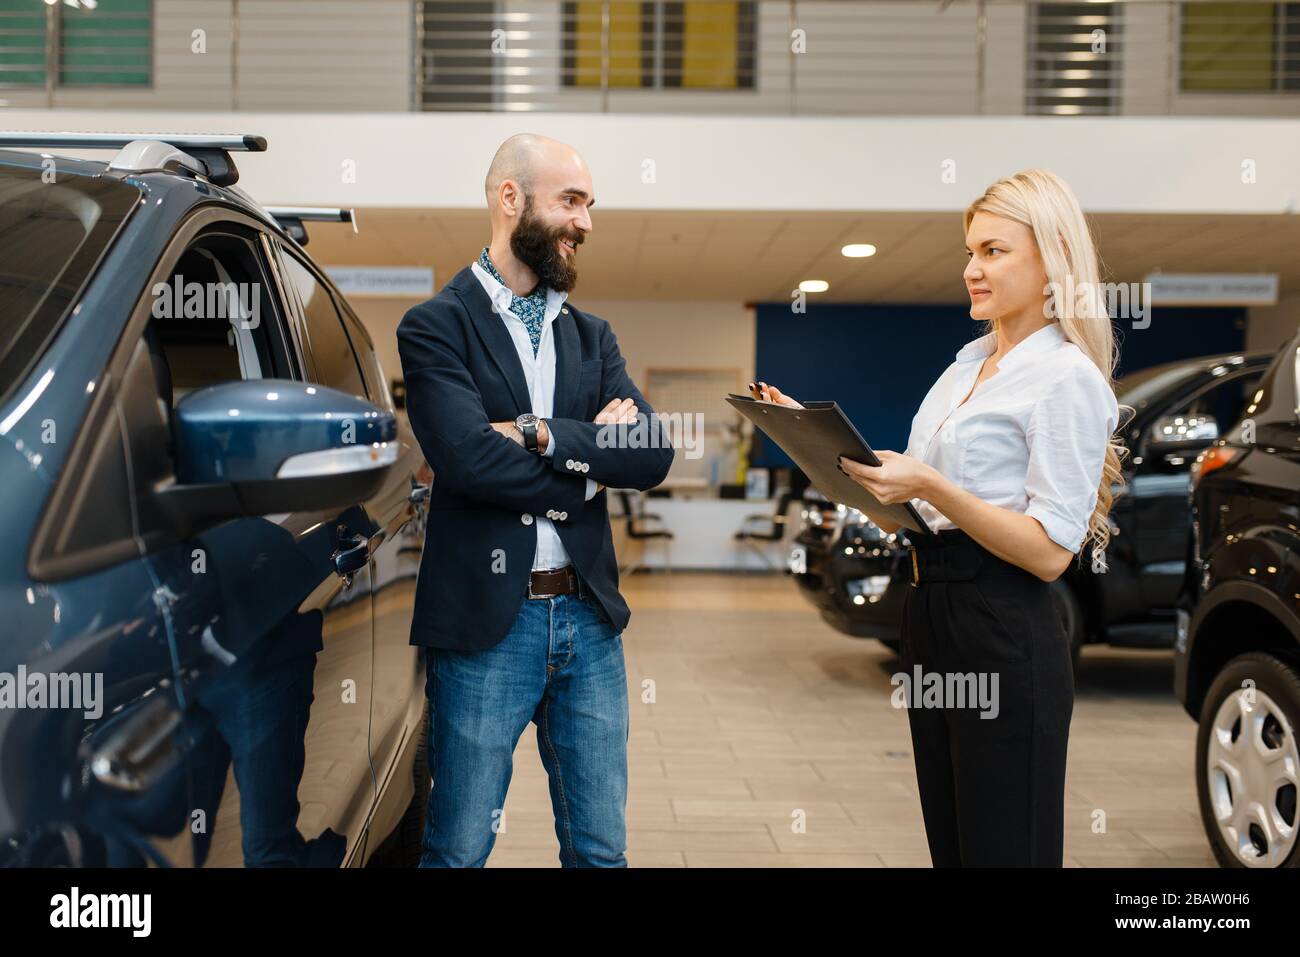 Smiling man and saleswoman in car dealership Stock Photo